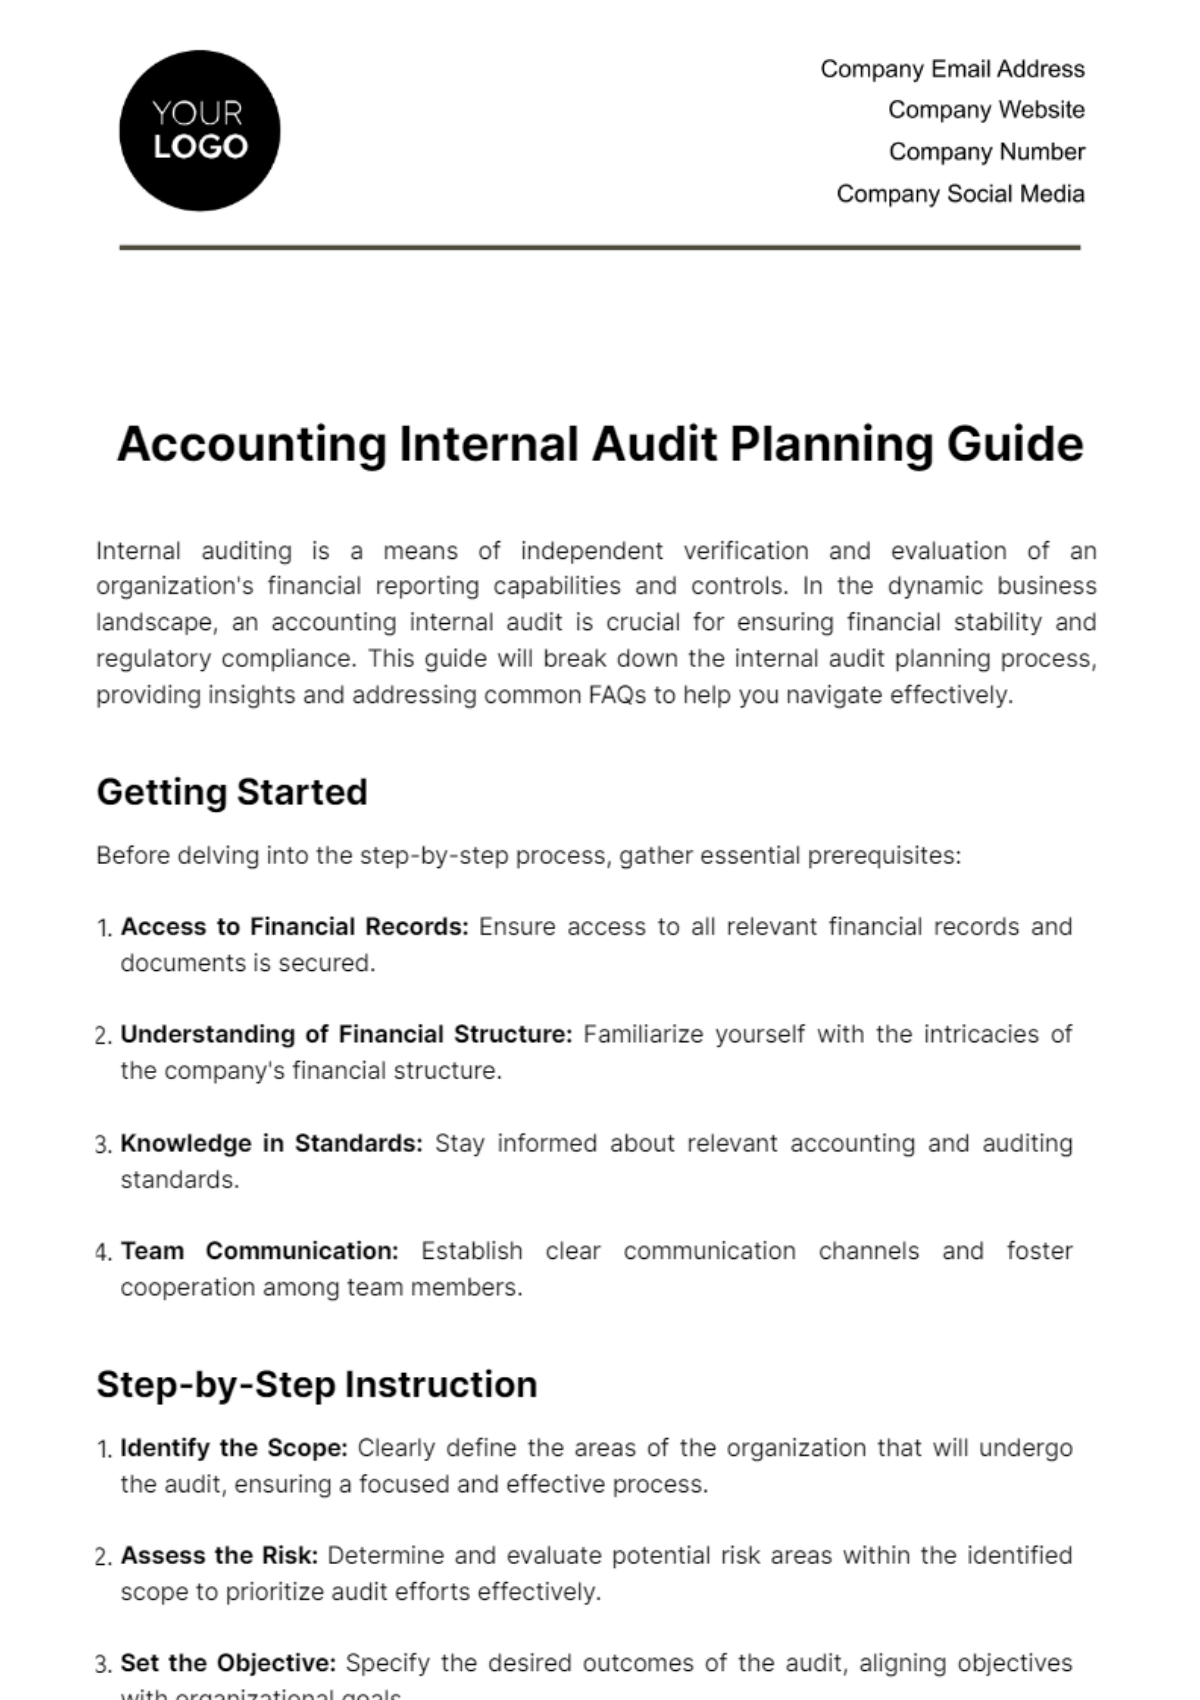 Free Accounting Internal Audit Planning Guide Template